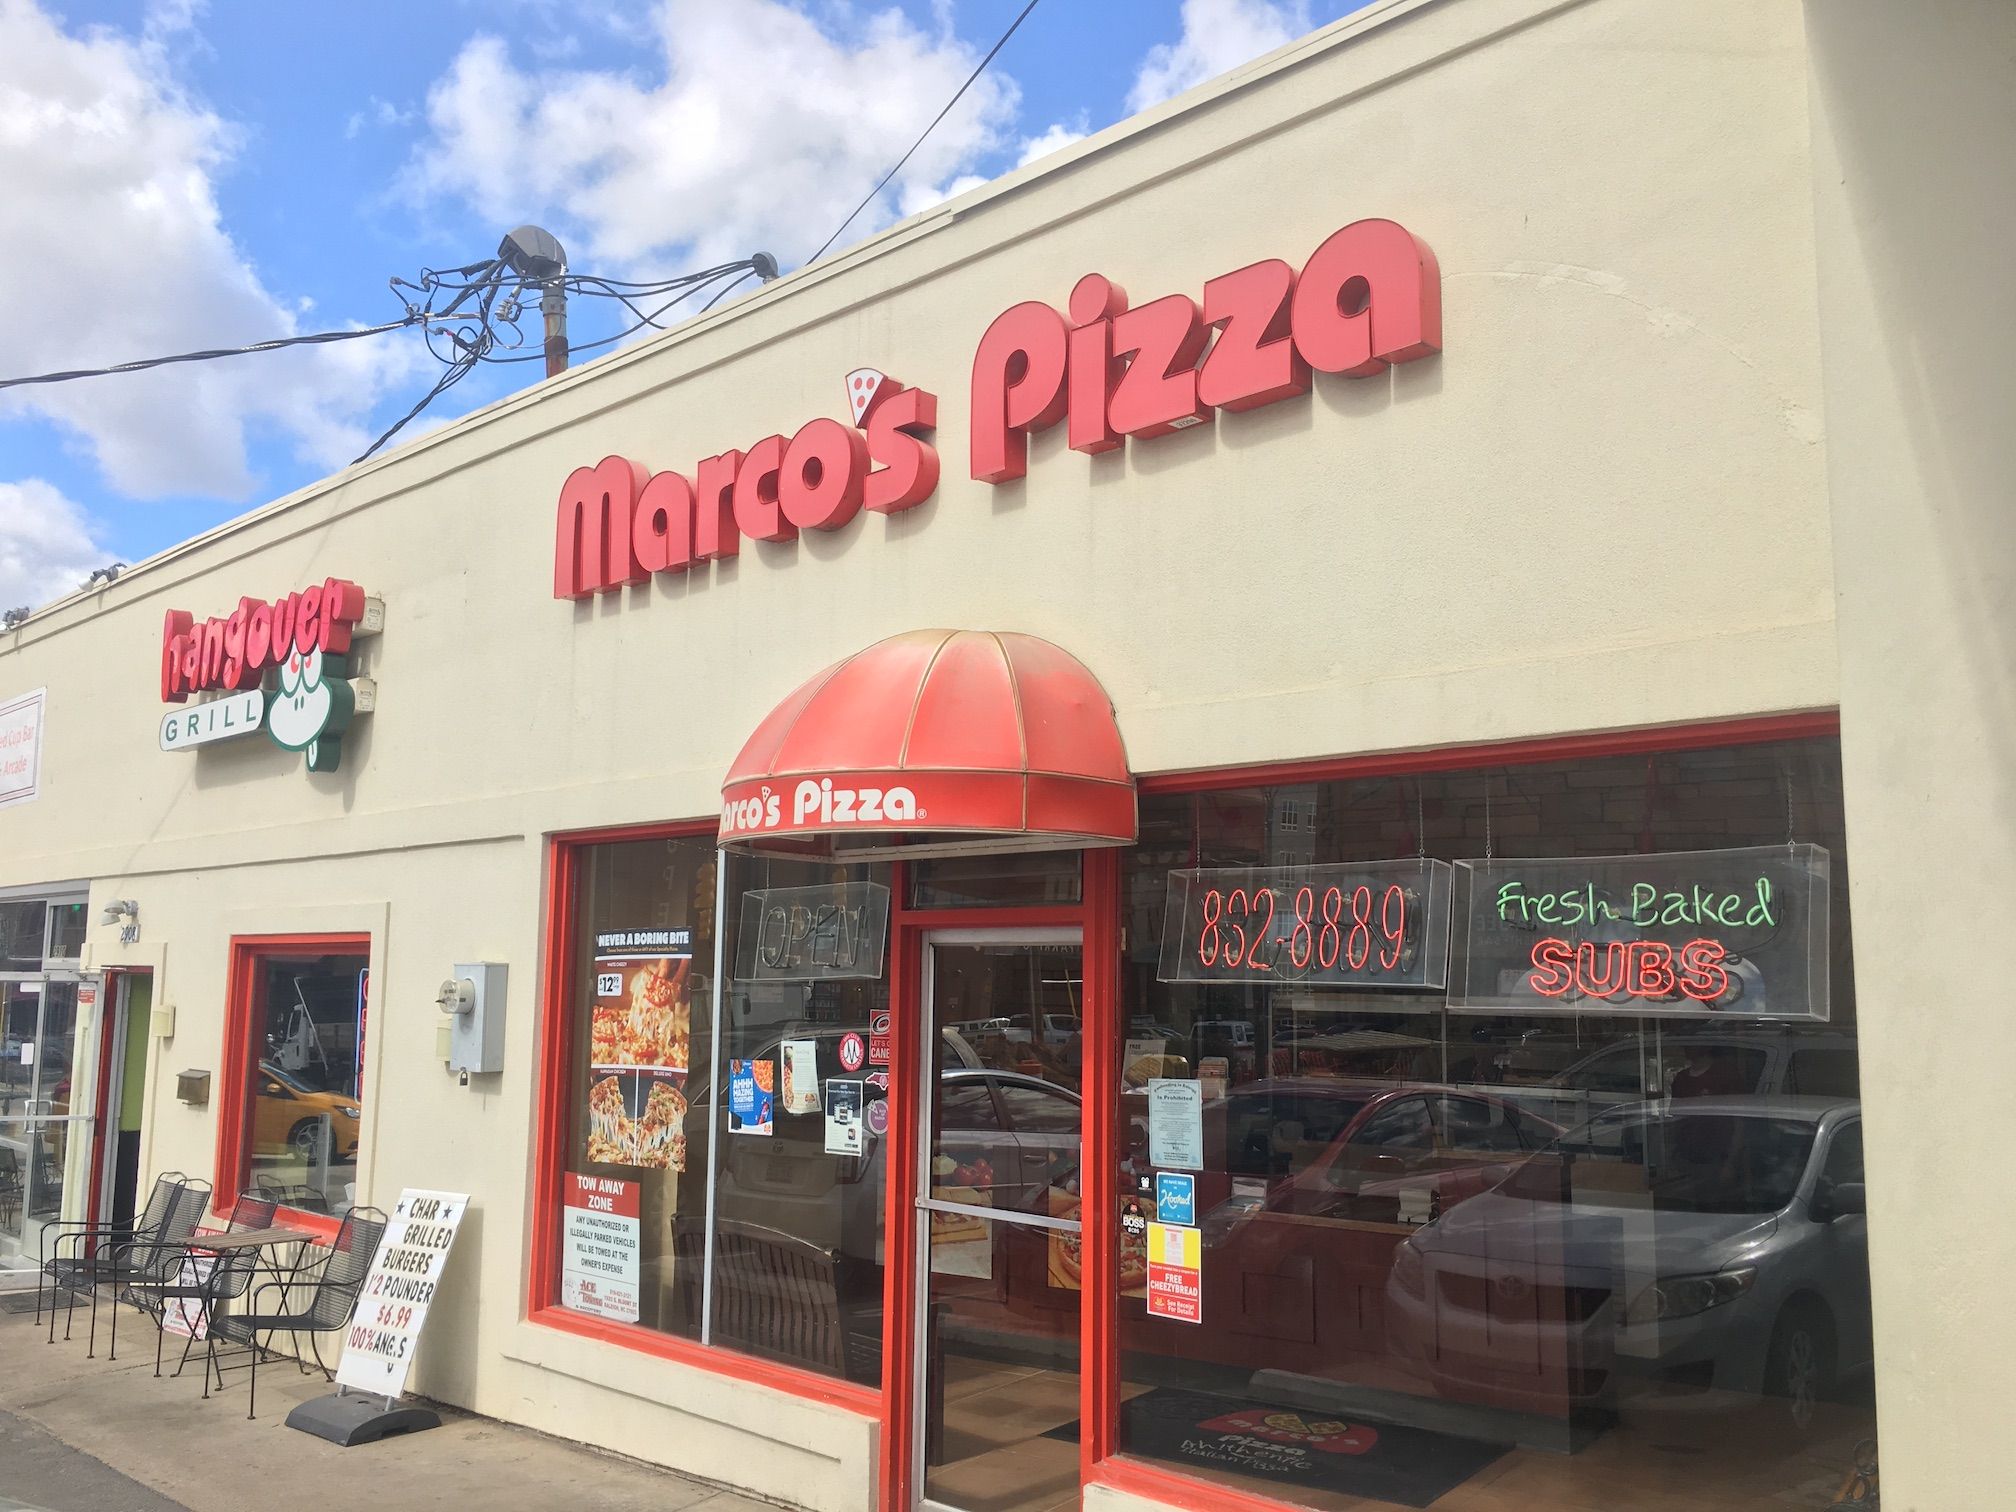 Tasty Tuesday - Marco's Pizza